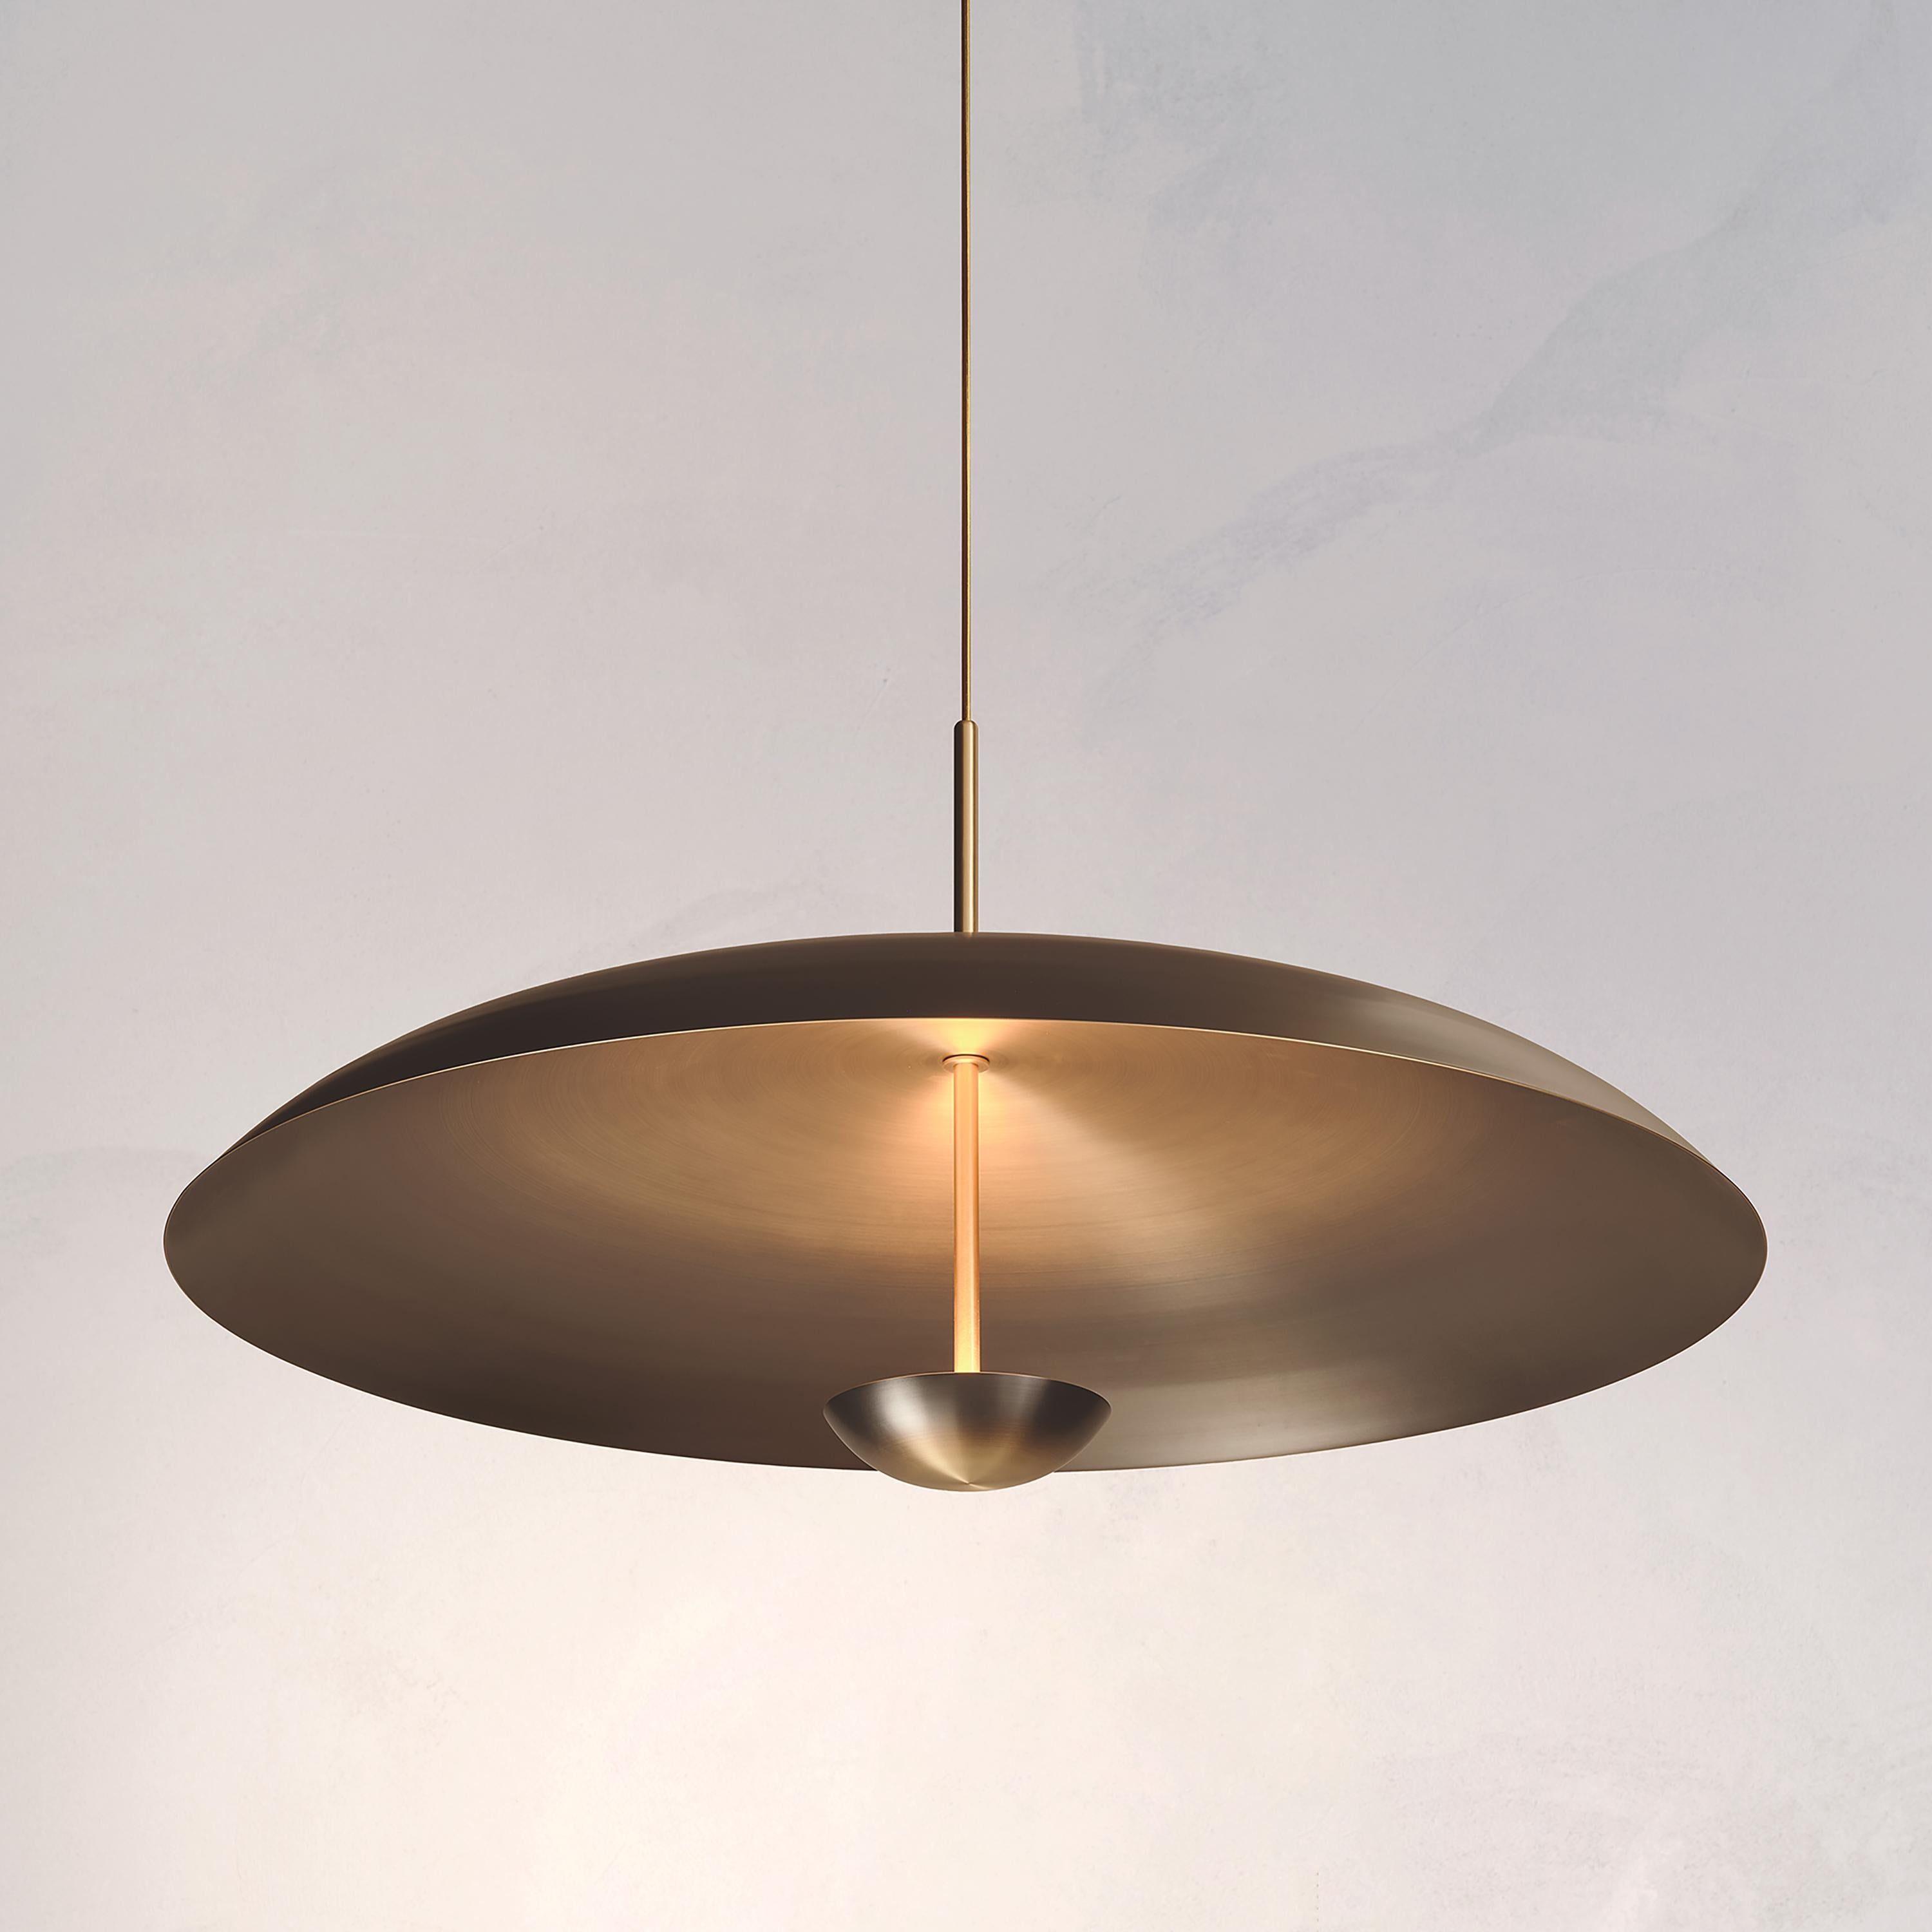 Two finely hand-spun brass plates make up this pendant light, a bronze to brass gradient accentuates the shape. The light is projected into the shade and reflects out, illuminating without creating a glare.

This light fixture is suitable for both